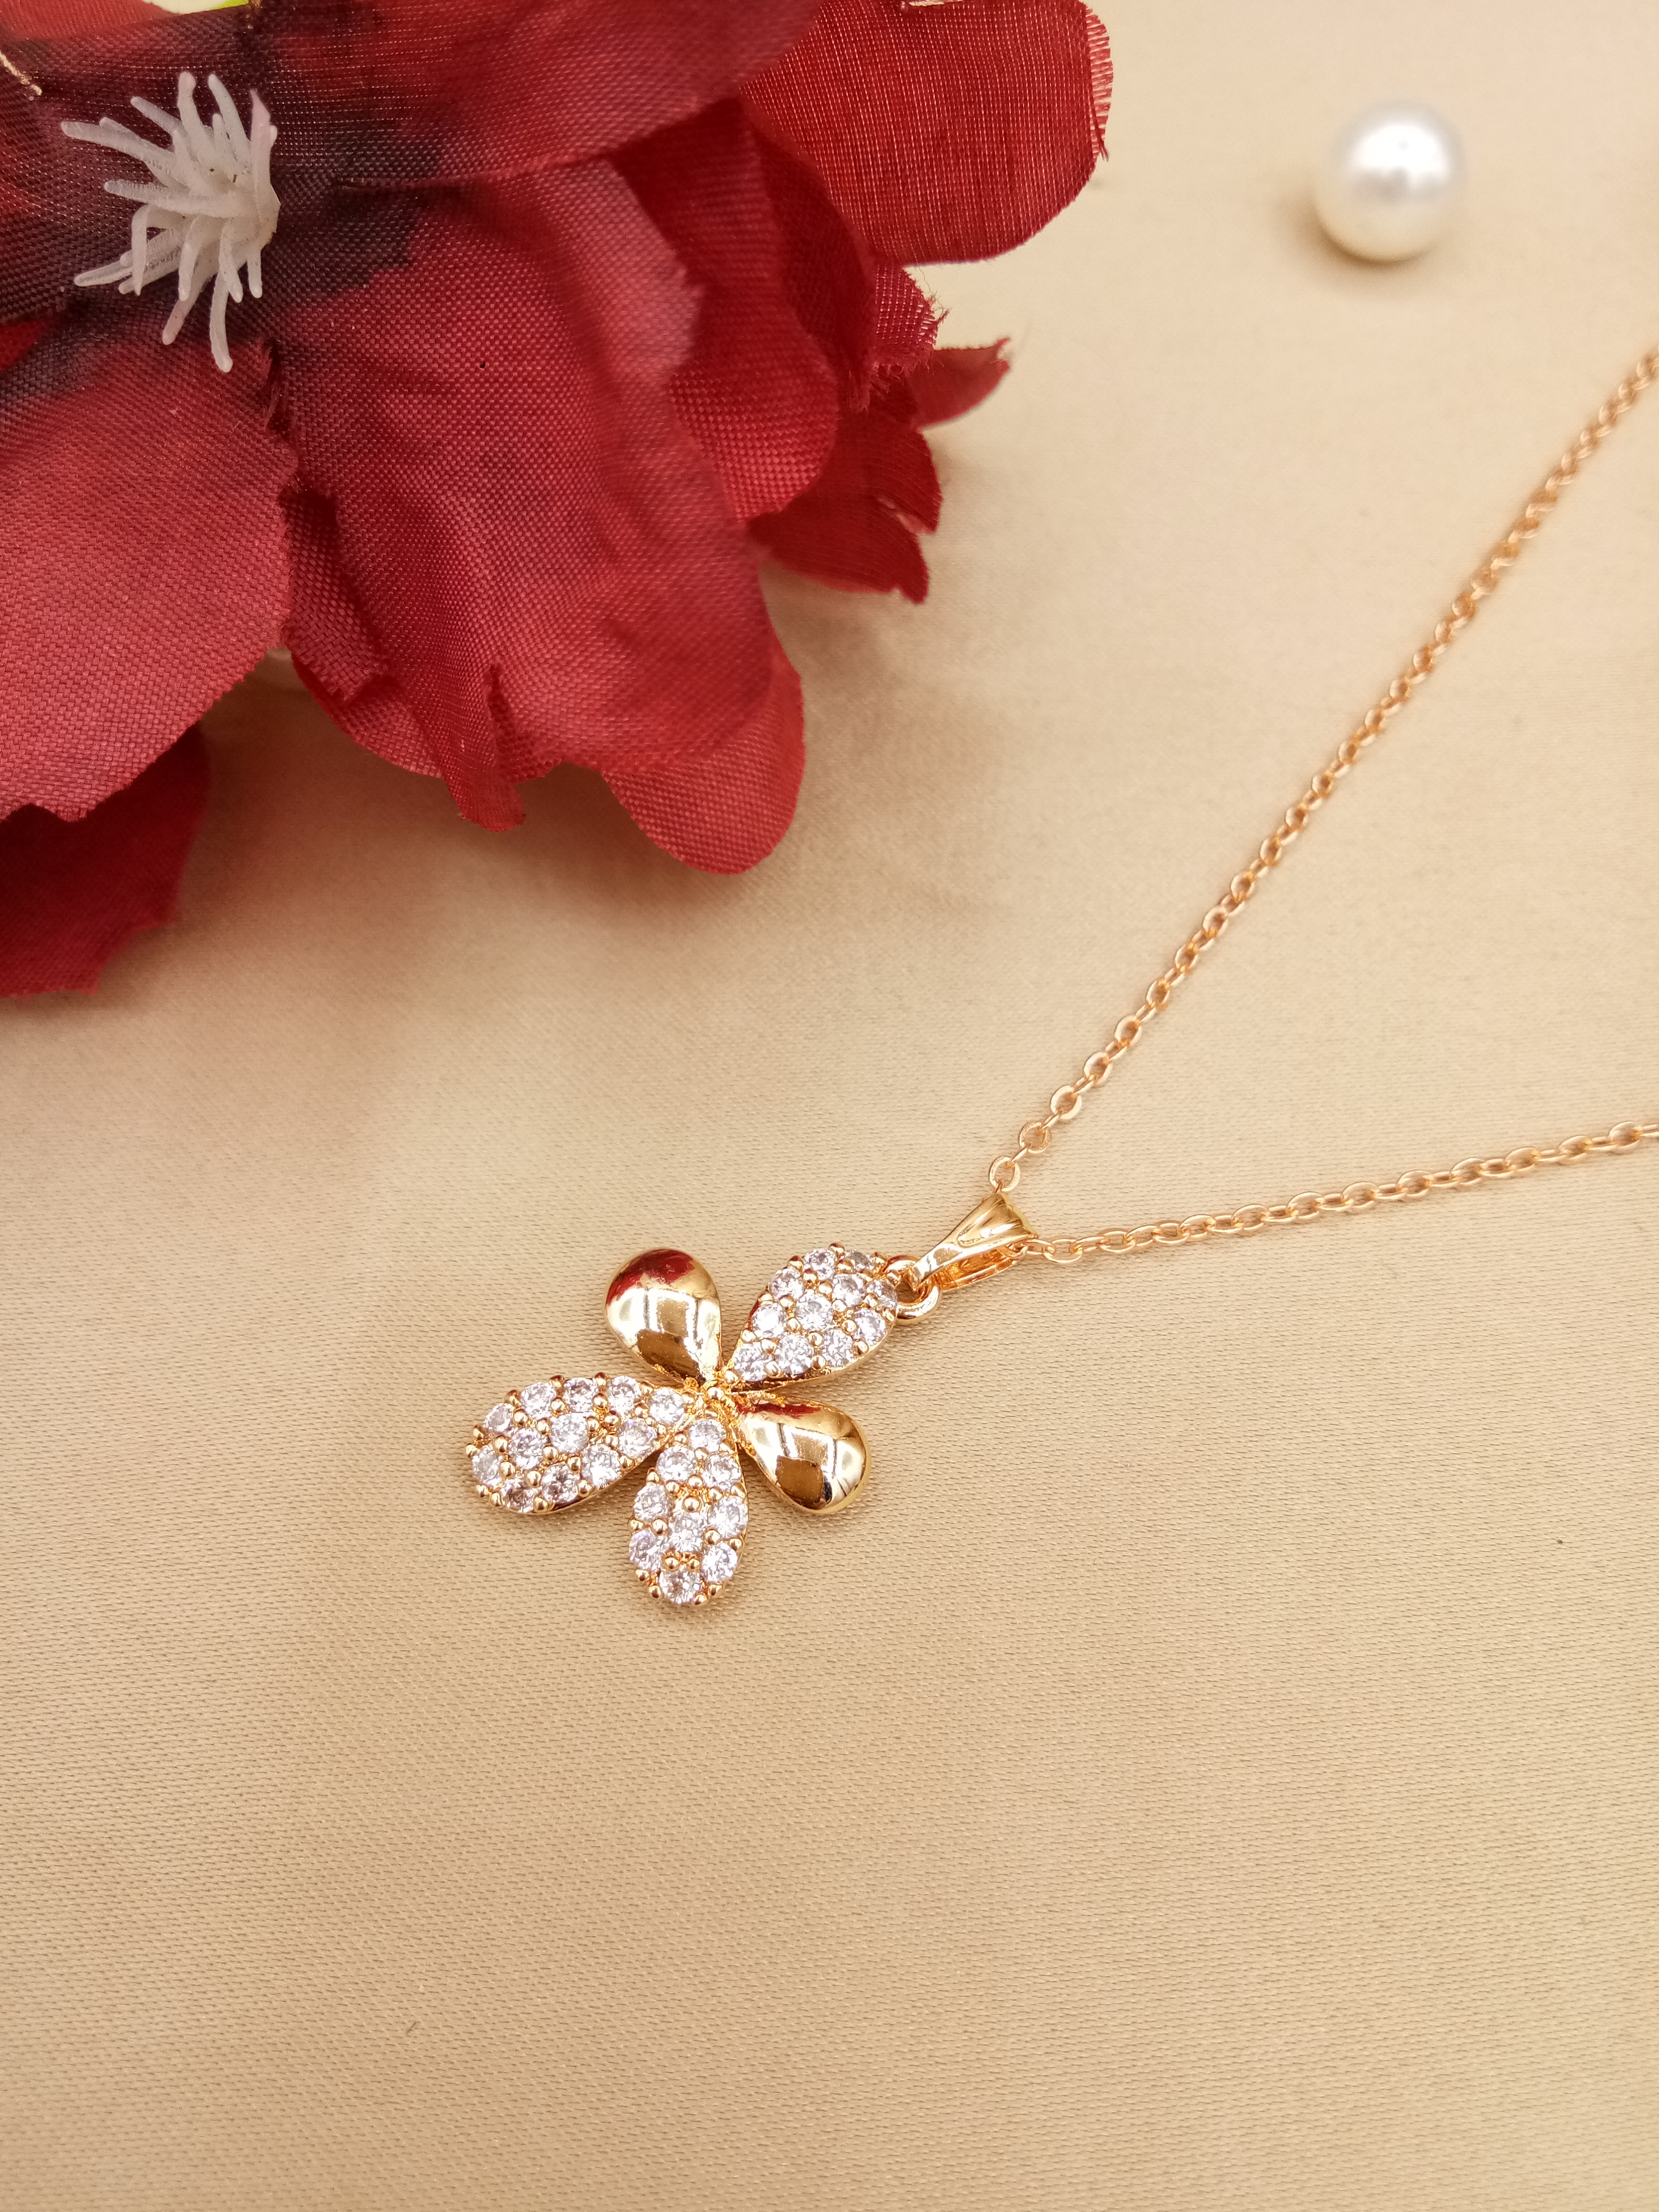 AD ROSE PENDENT - 07194 NX